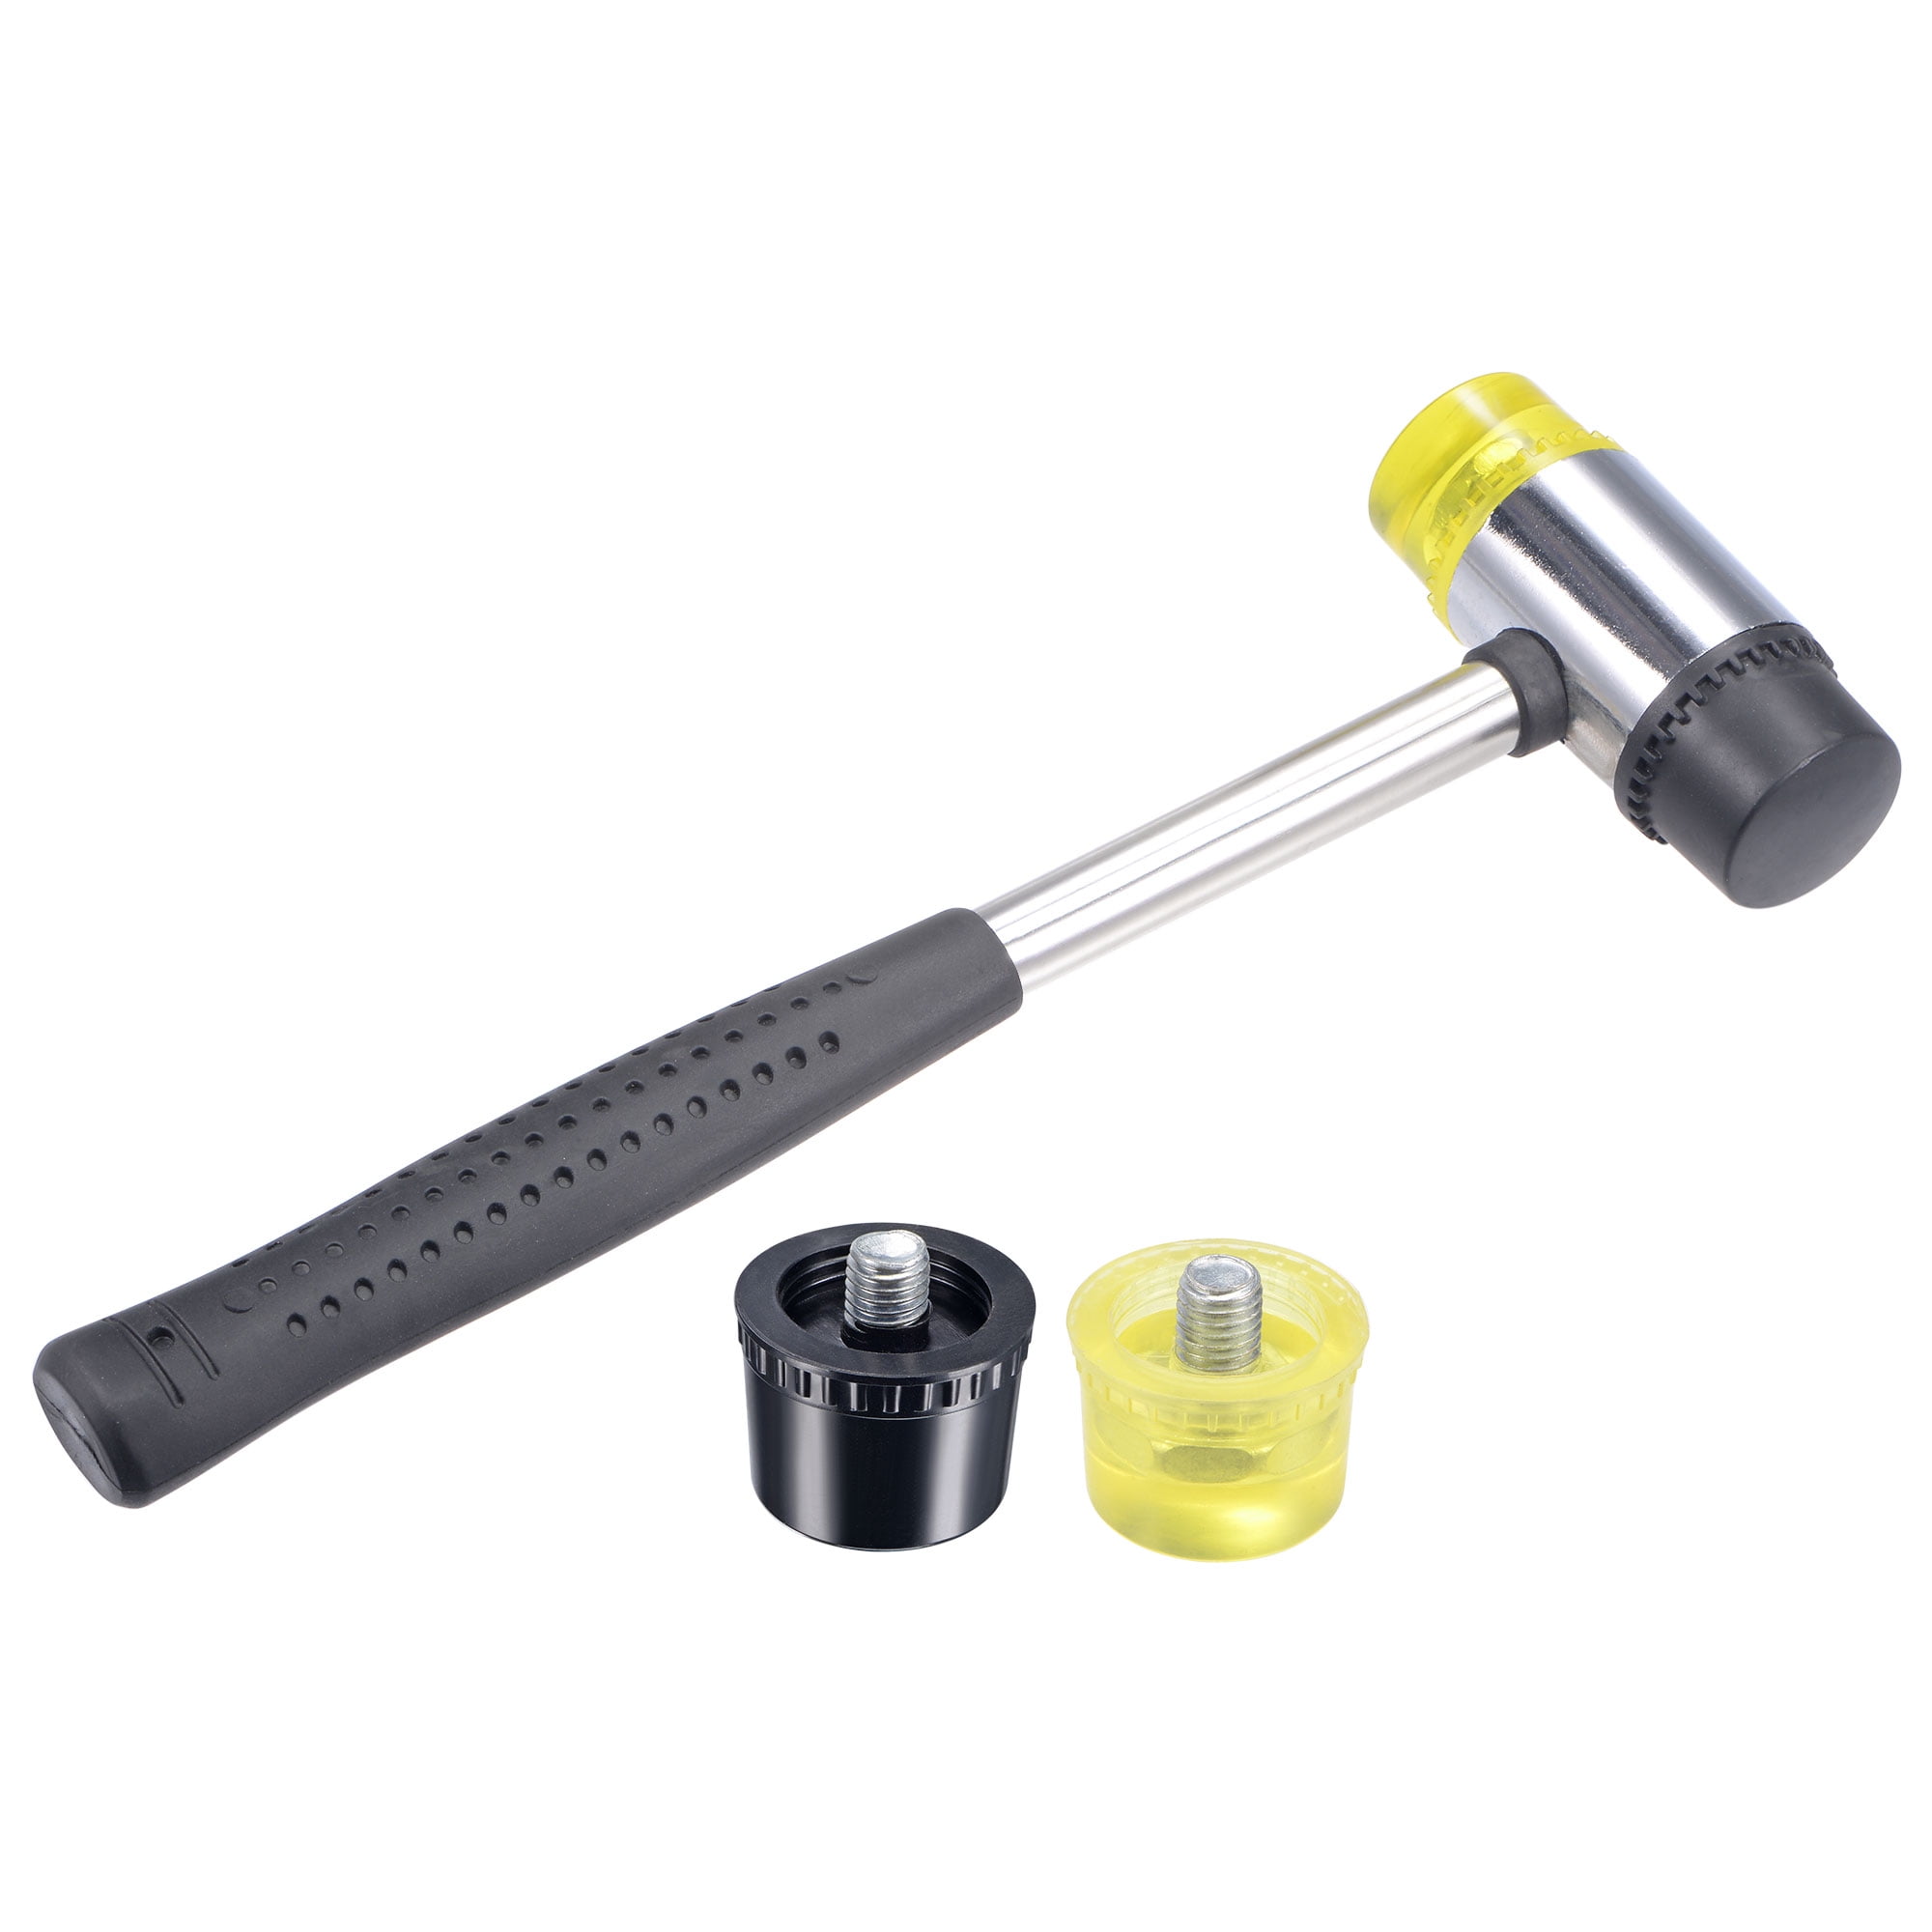 2-Way 25mm Mini Small Rubber And Nylon Head Face Mallet Hammer Handle Shaft